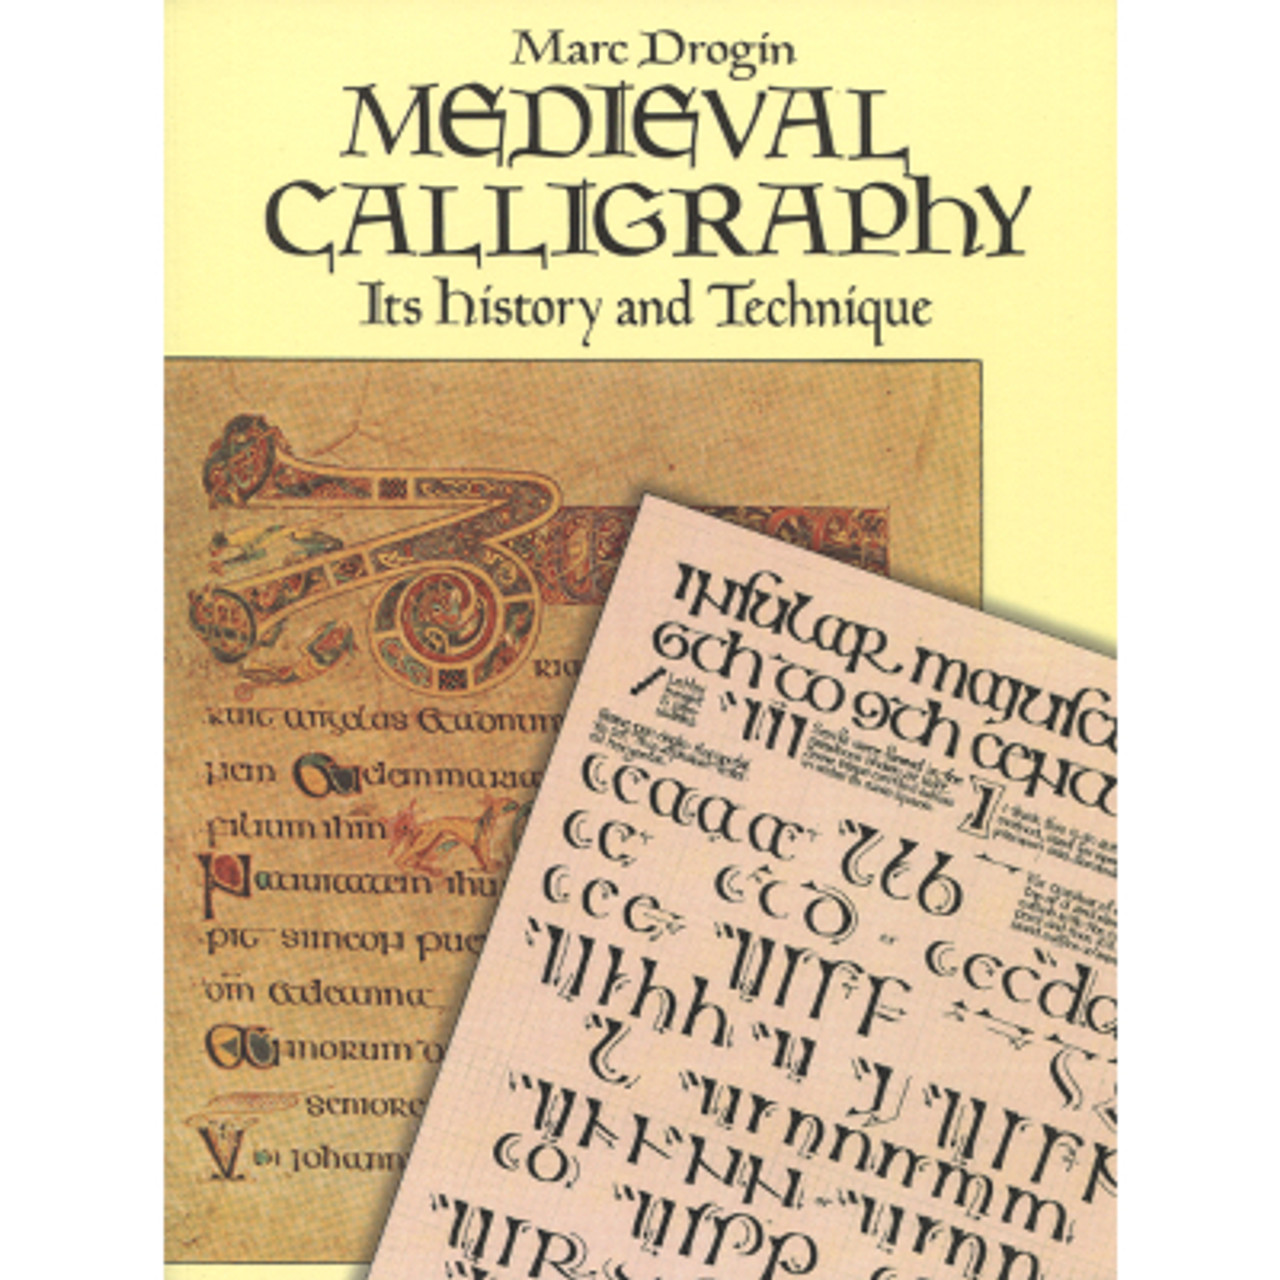 Classic Calligraphy for Beginners by Younghae Chung - John Neal Books